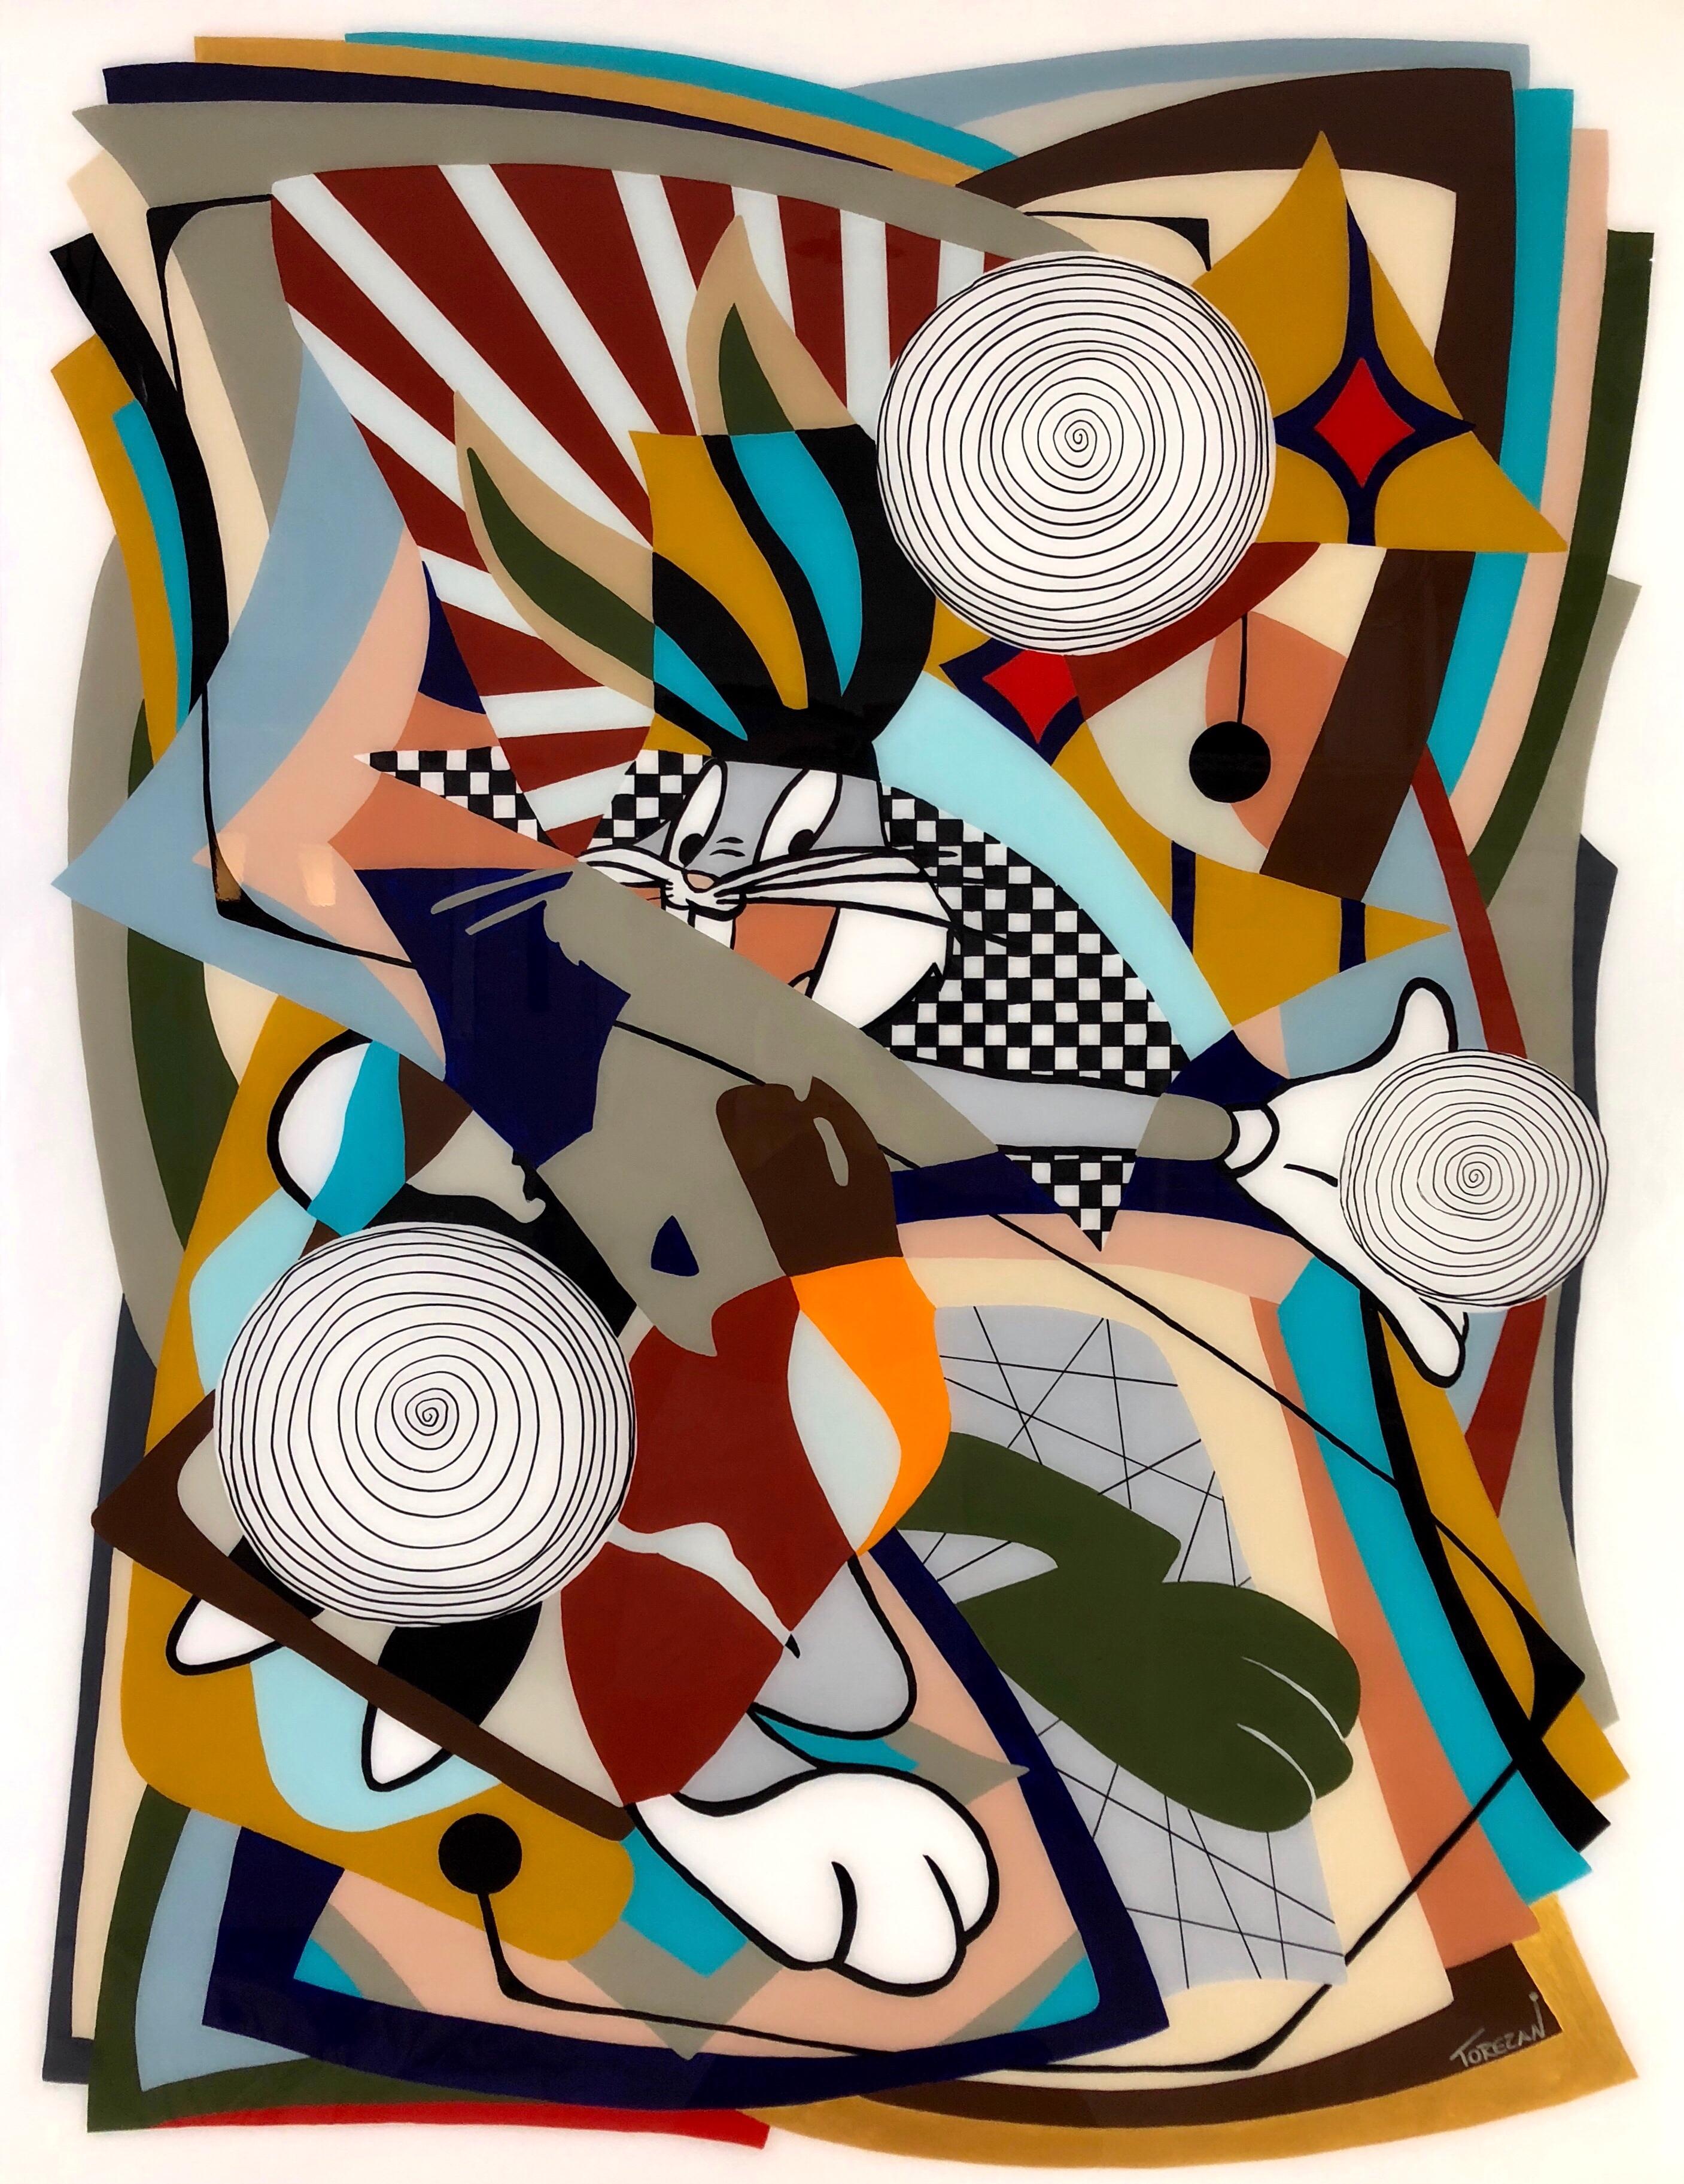 Amauri Torezan
Fun to Utopia - Bugs Bunny
Acrylic and resin on wood panel
48" x 36"

   Torezan is a contemporary artist living in South Florida in the United States. Inspired by modernist abstractions and the modern lifestyle in the Mid-20th